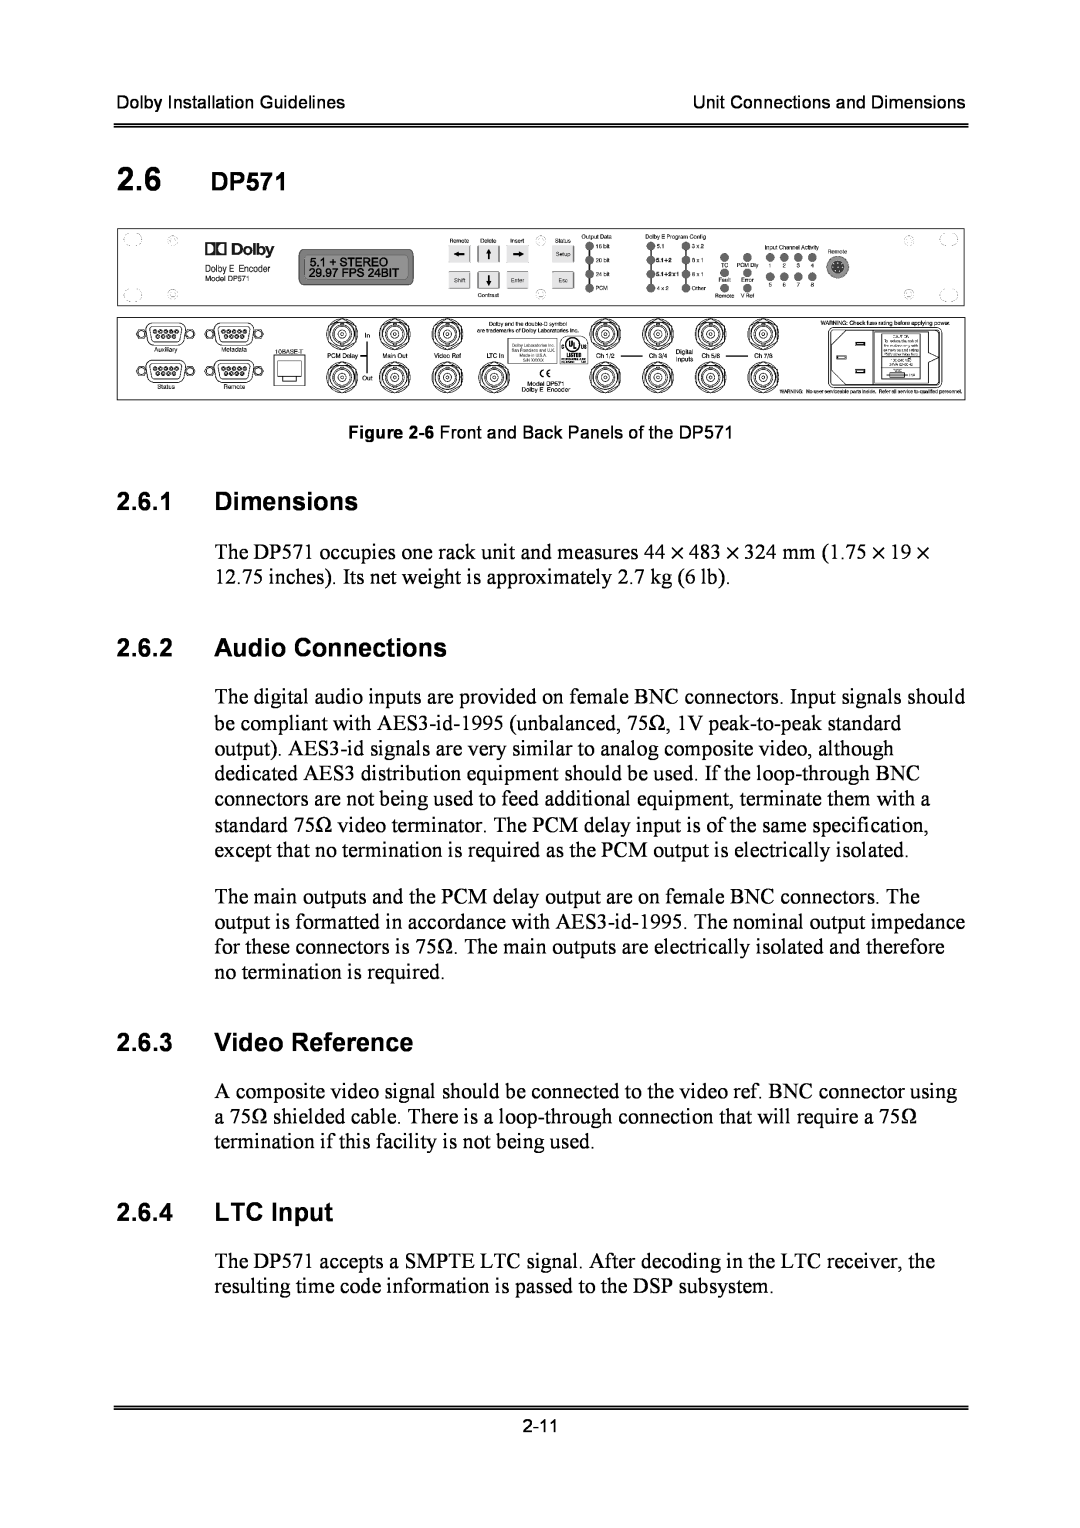 Dolby Laboratories S01/13621 2.6 DP571, 2.6.1Dimensions, 2.6.2Audio Connections, 2.6.3Video Reference, 2.6.4LTC Input 